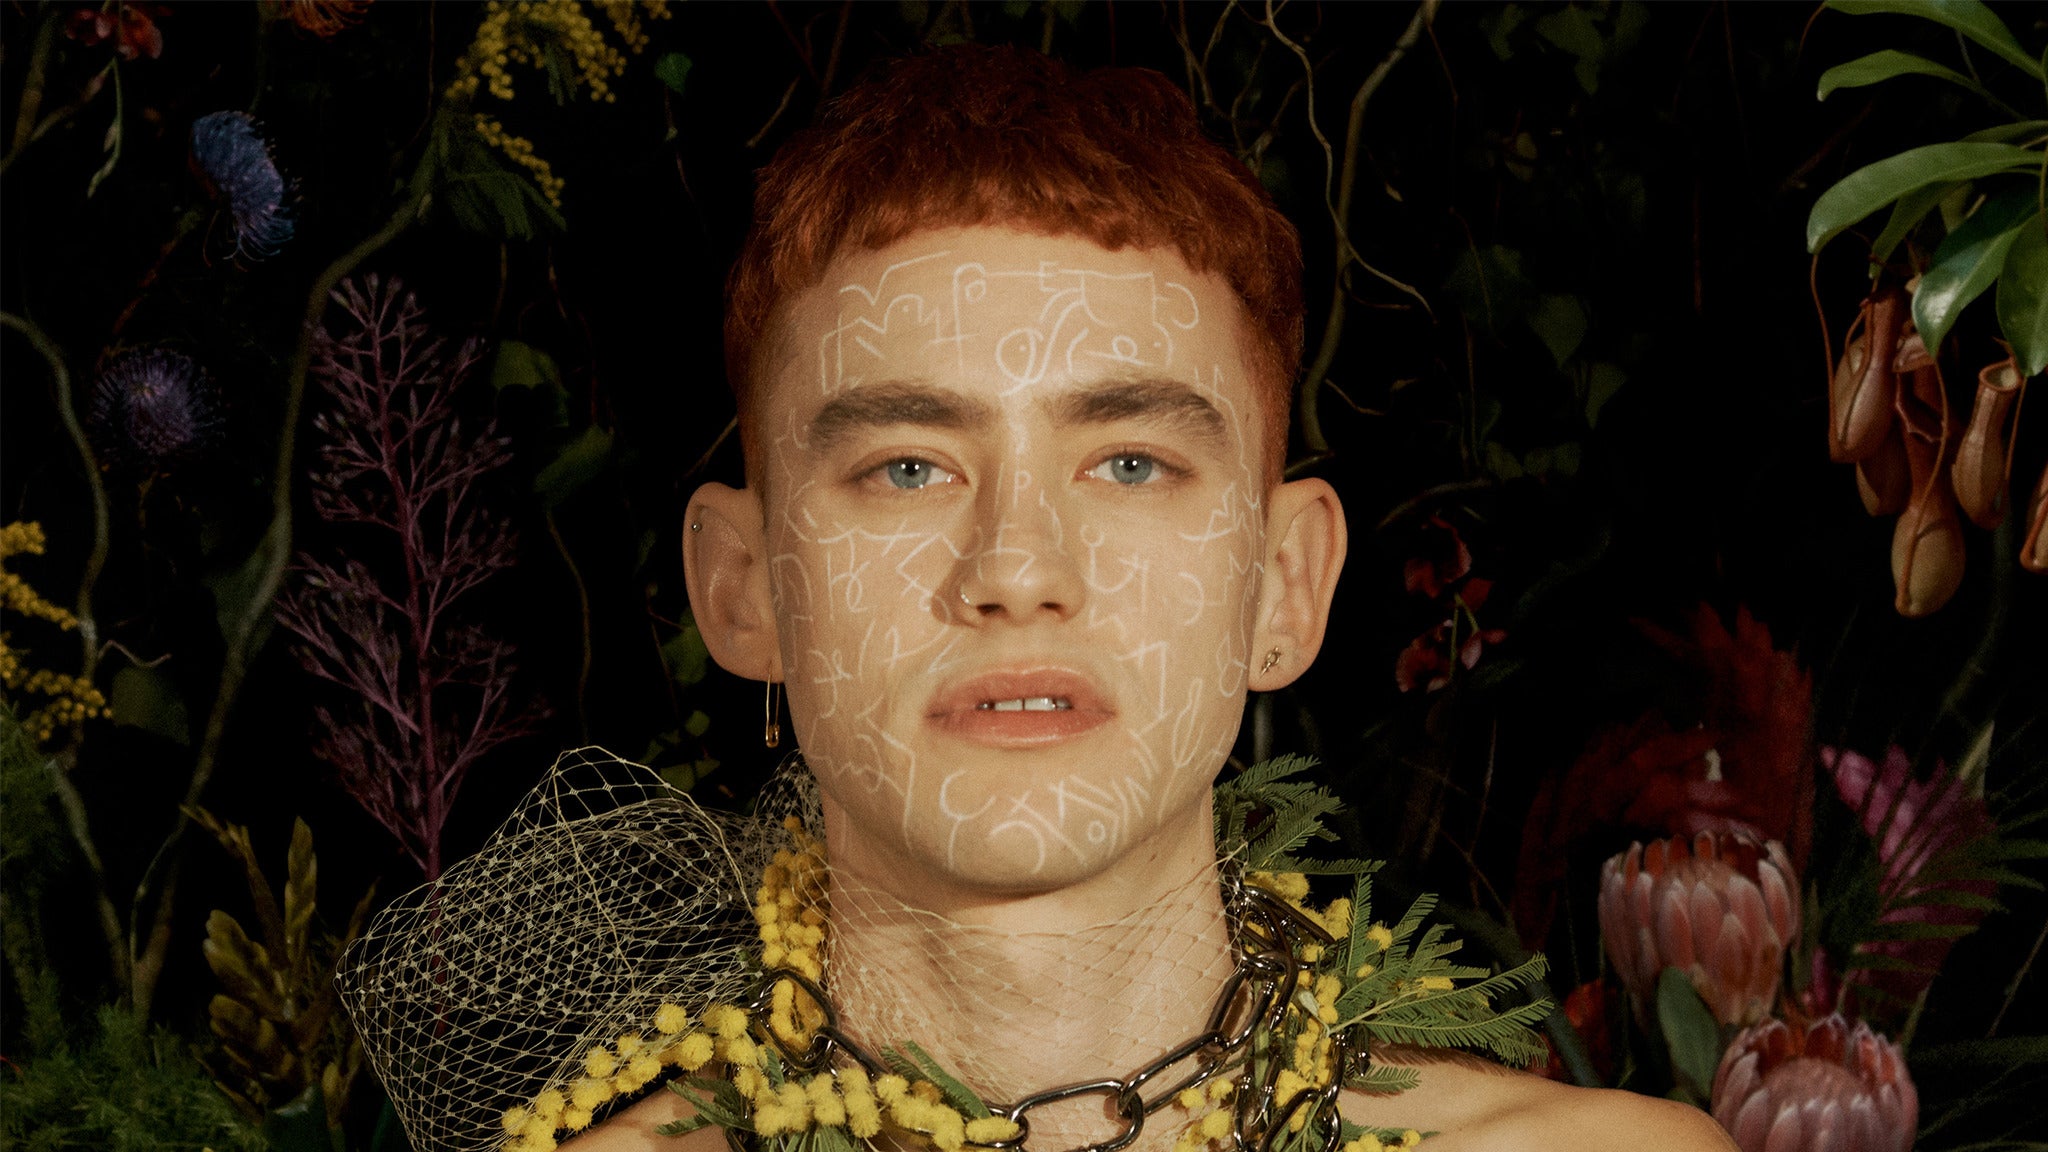 Years & Years in Los Angeles promo photo for Citi® Cardmember presale offer code